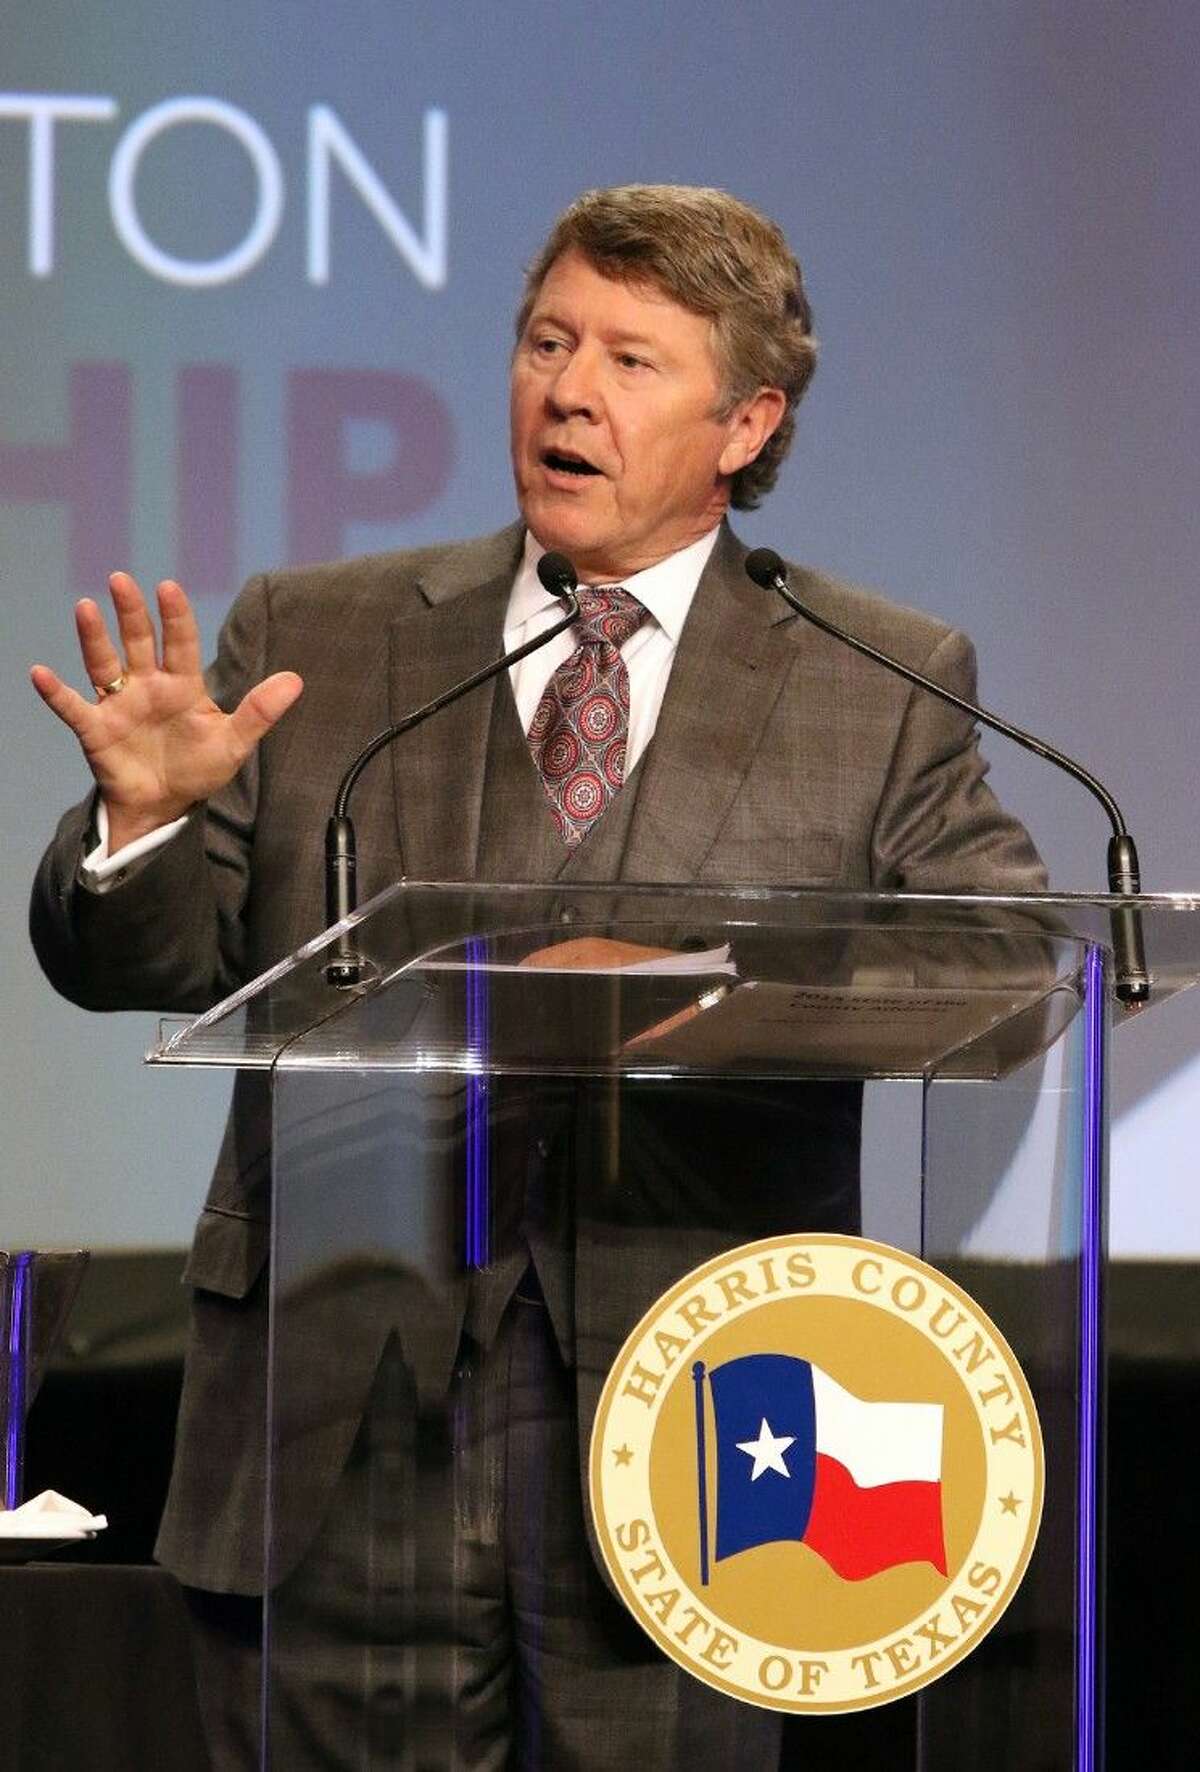 Harris County Judge Ed Emmett speaks at the Greater Houston Partnership's annual State of the County Address for 2015 at the NRG Center in Houston, Texas on Friday, February 13, 2015. To view or purchase this photo and others like it, go to HCNPics.com.